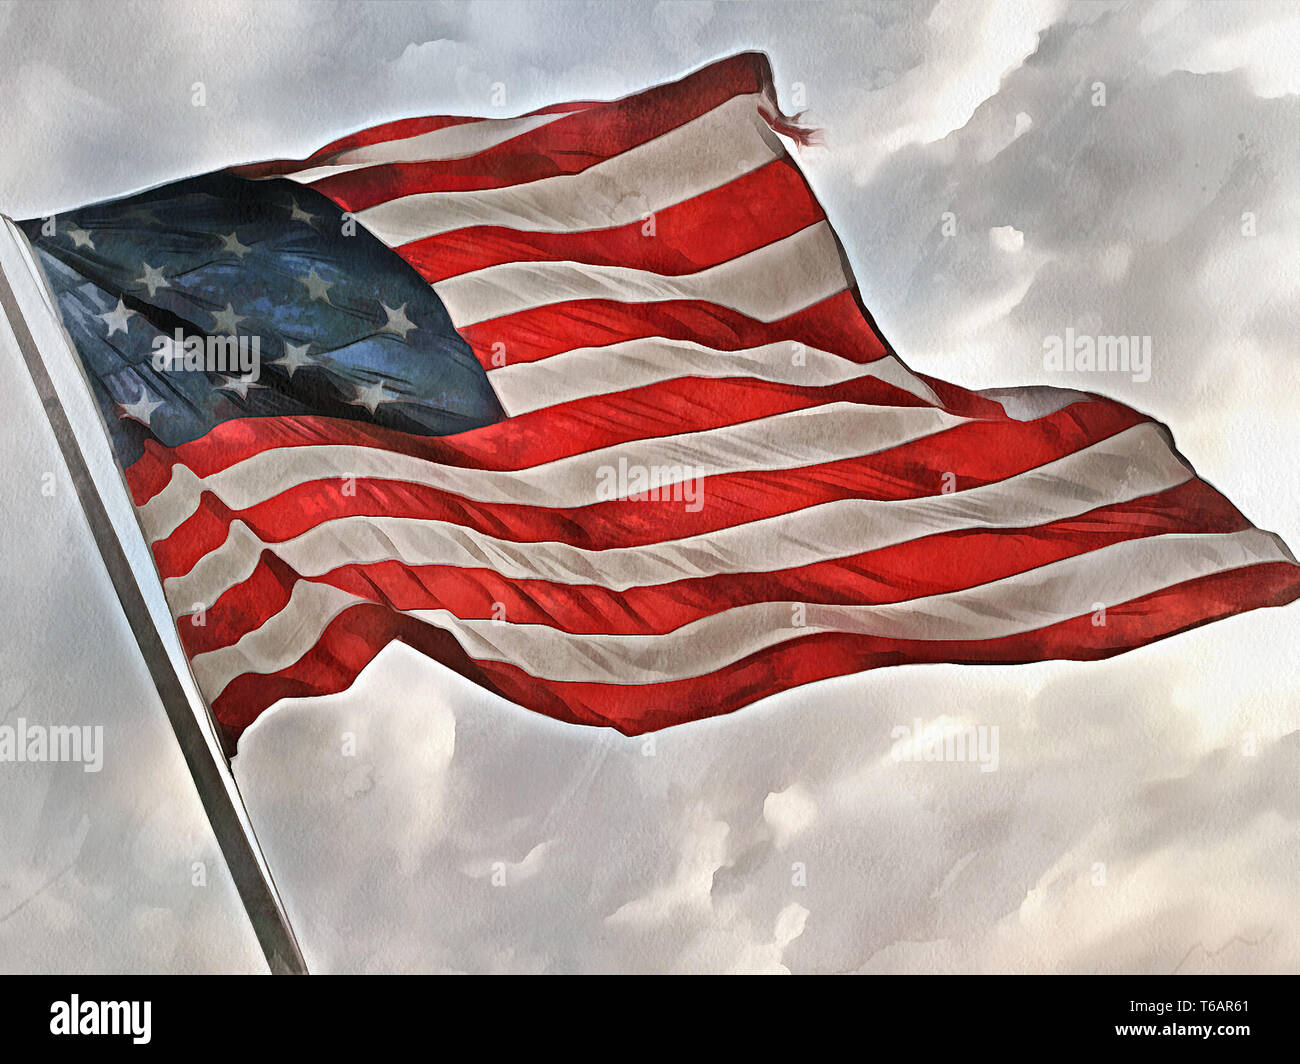 Painted image of the American flag Stock Photo